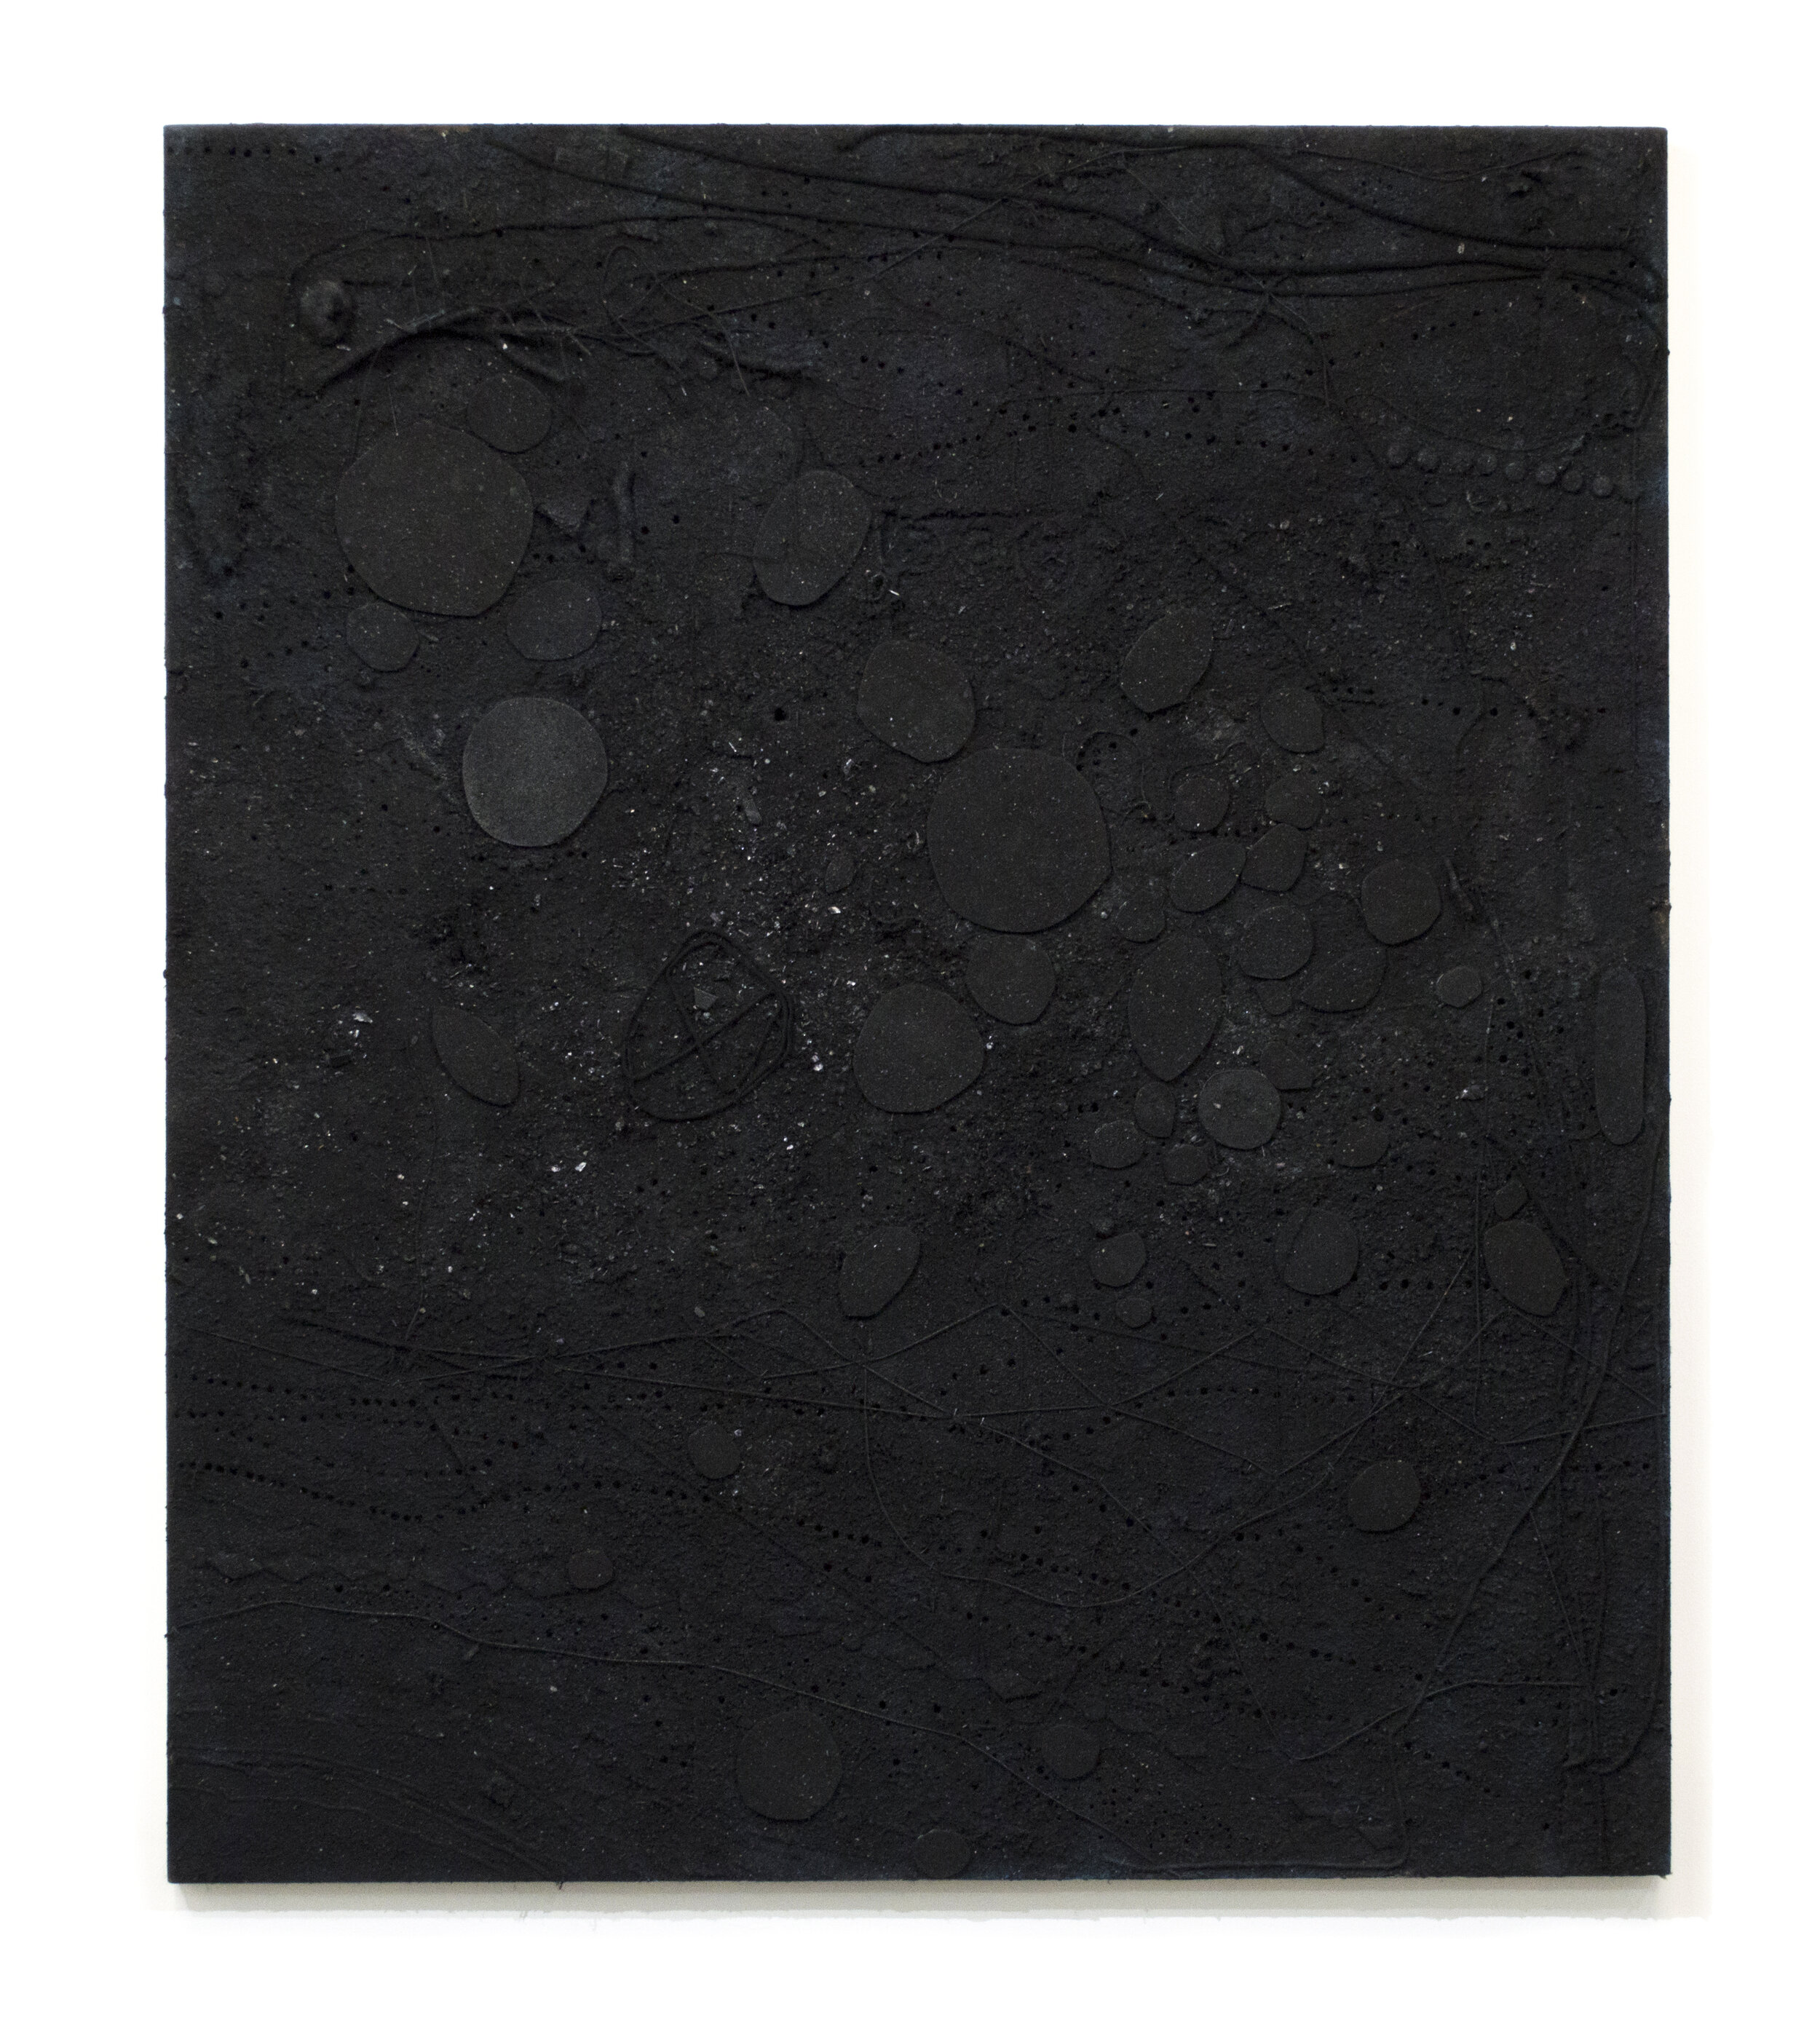 Untitled 2018 - Adhesive, spray paint, blackened mirror, fur, dirt, stones, yarn, on canvas. 70 x 60 inches